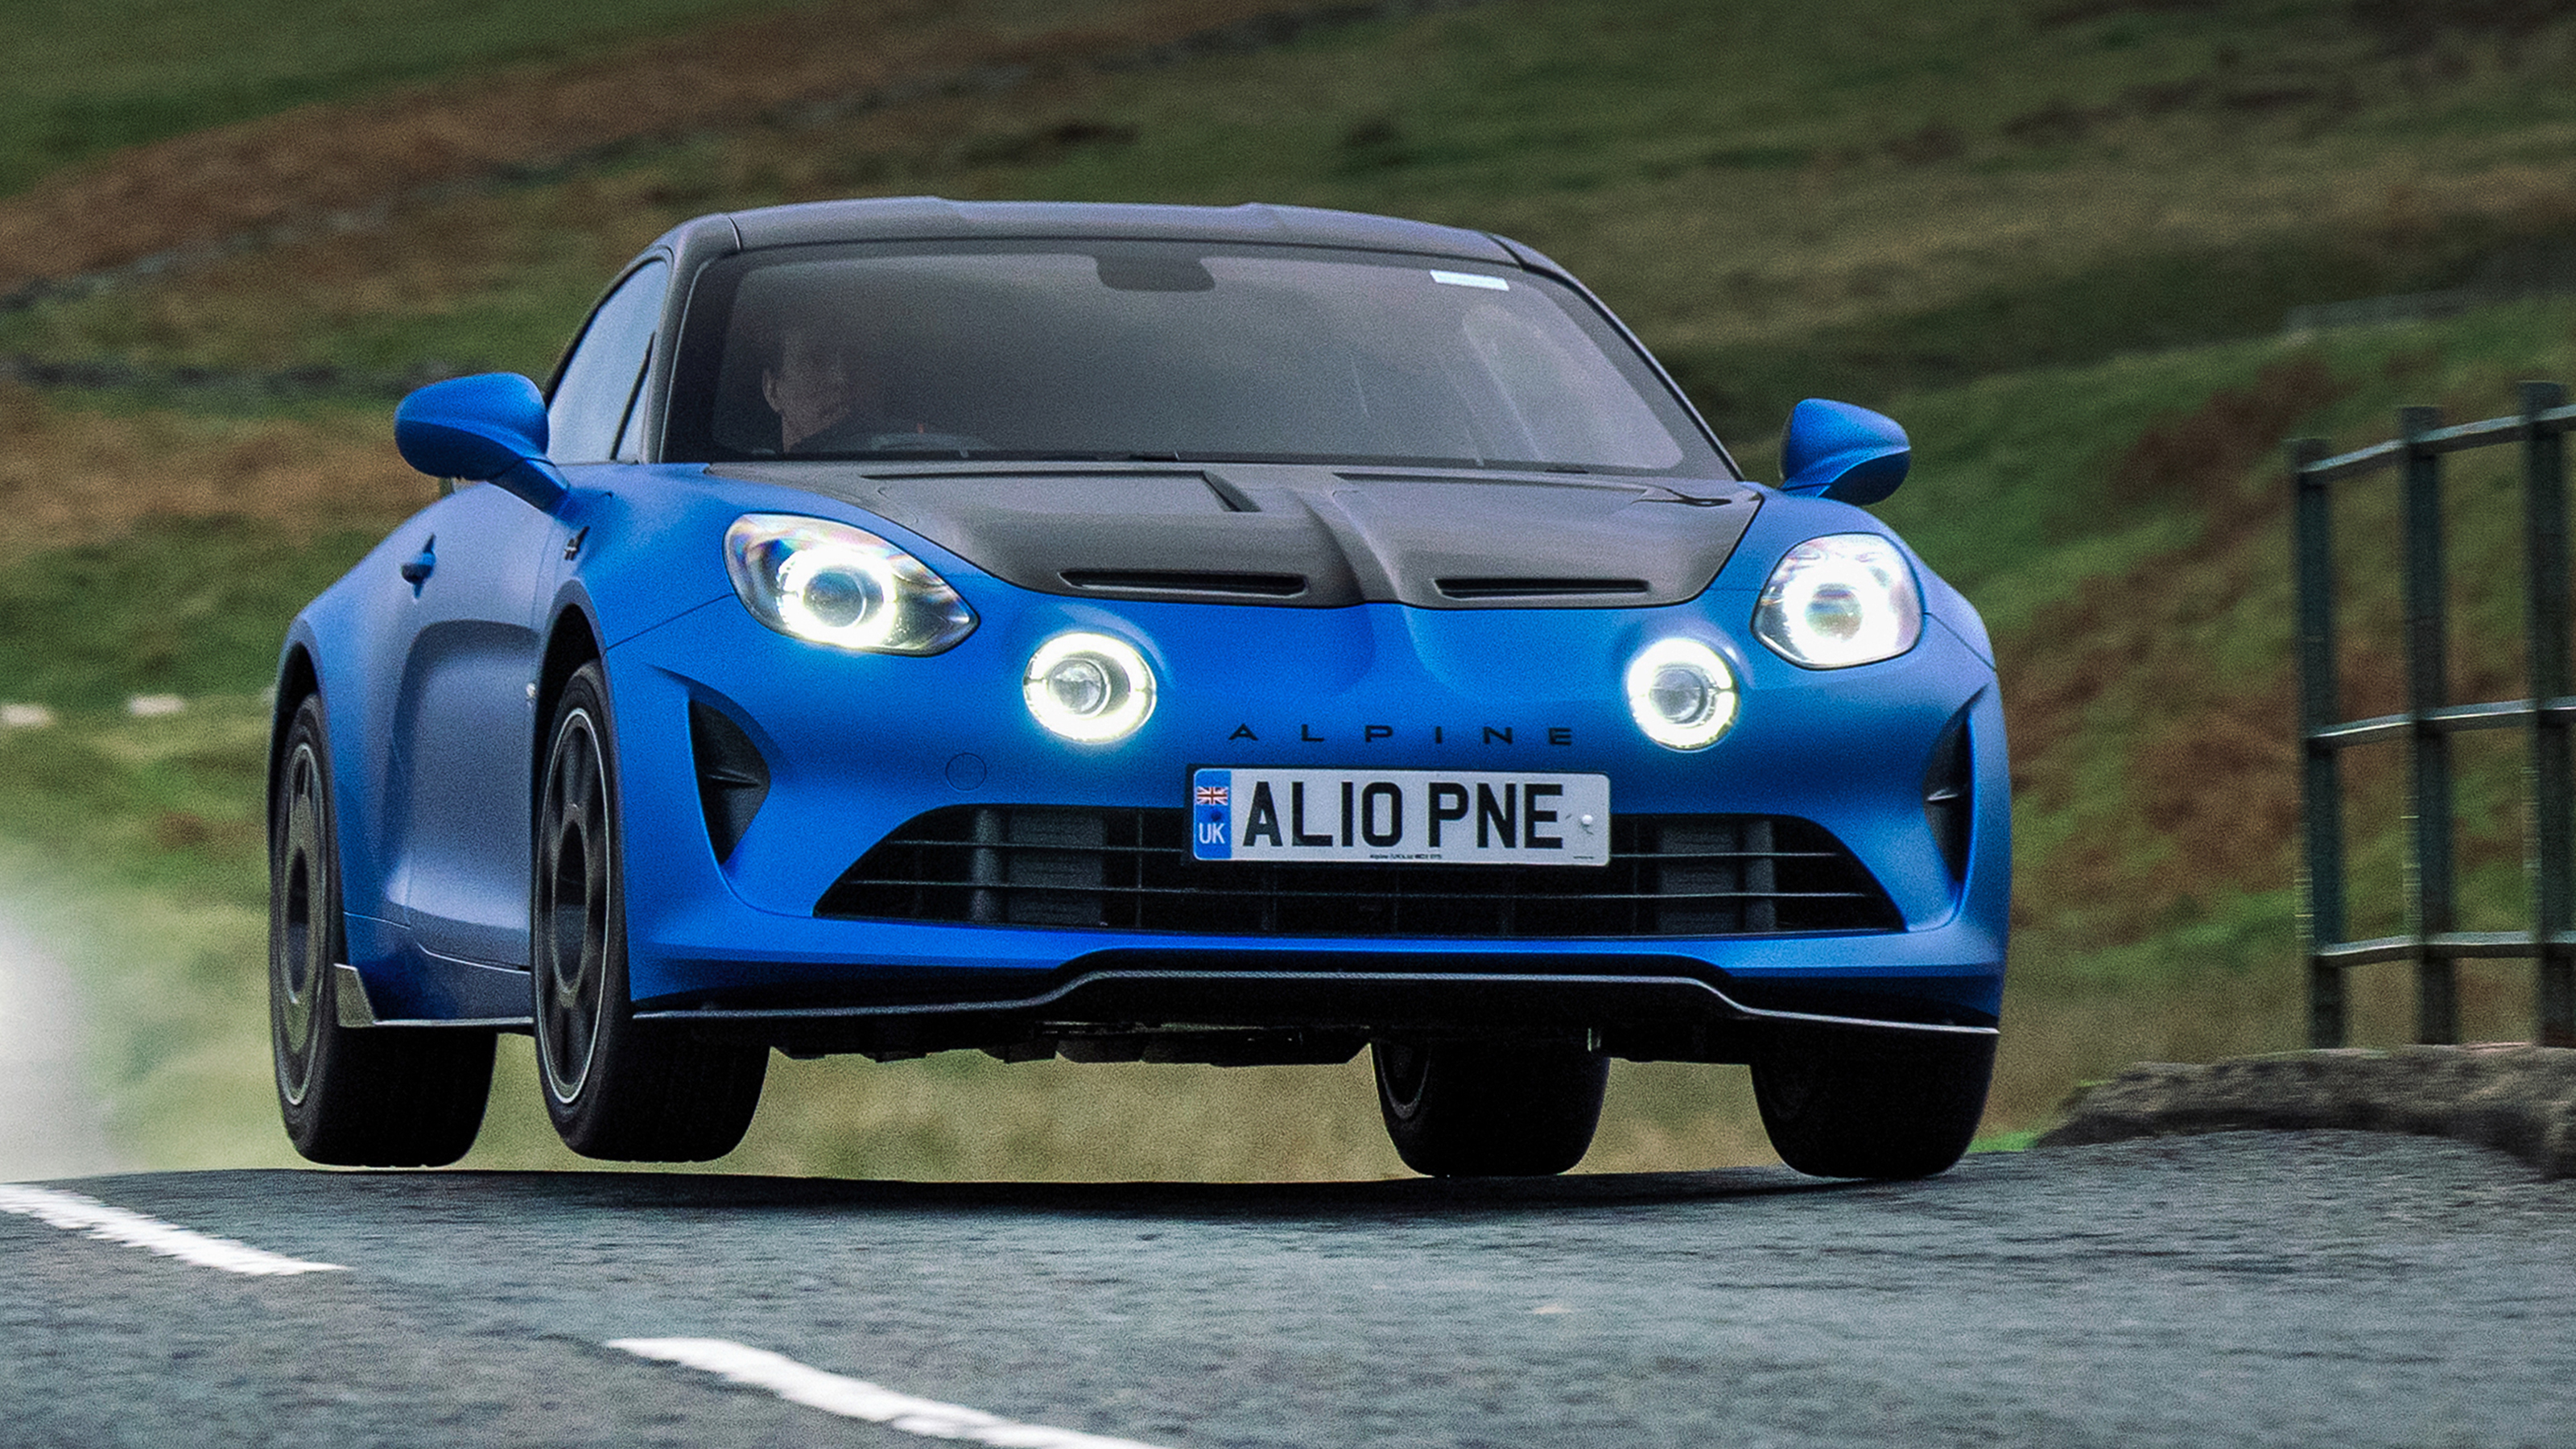 Alpine A110R review: carbon-wheeled lightweight driven in the UK